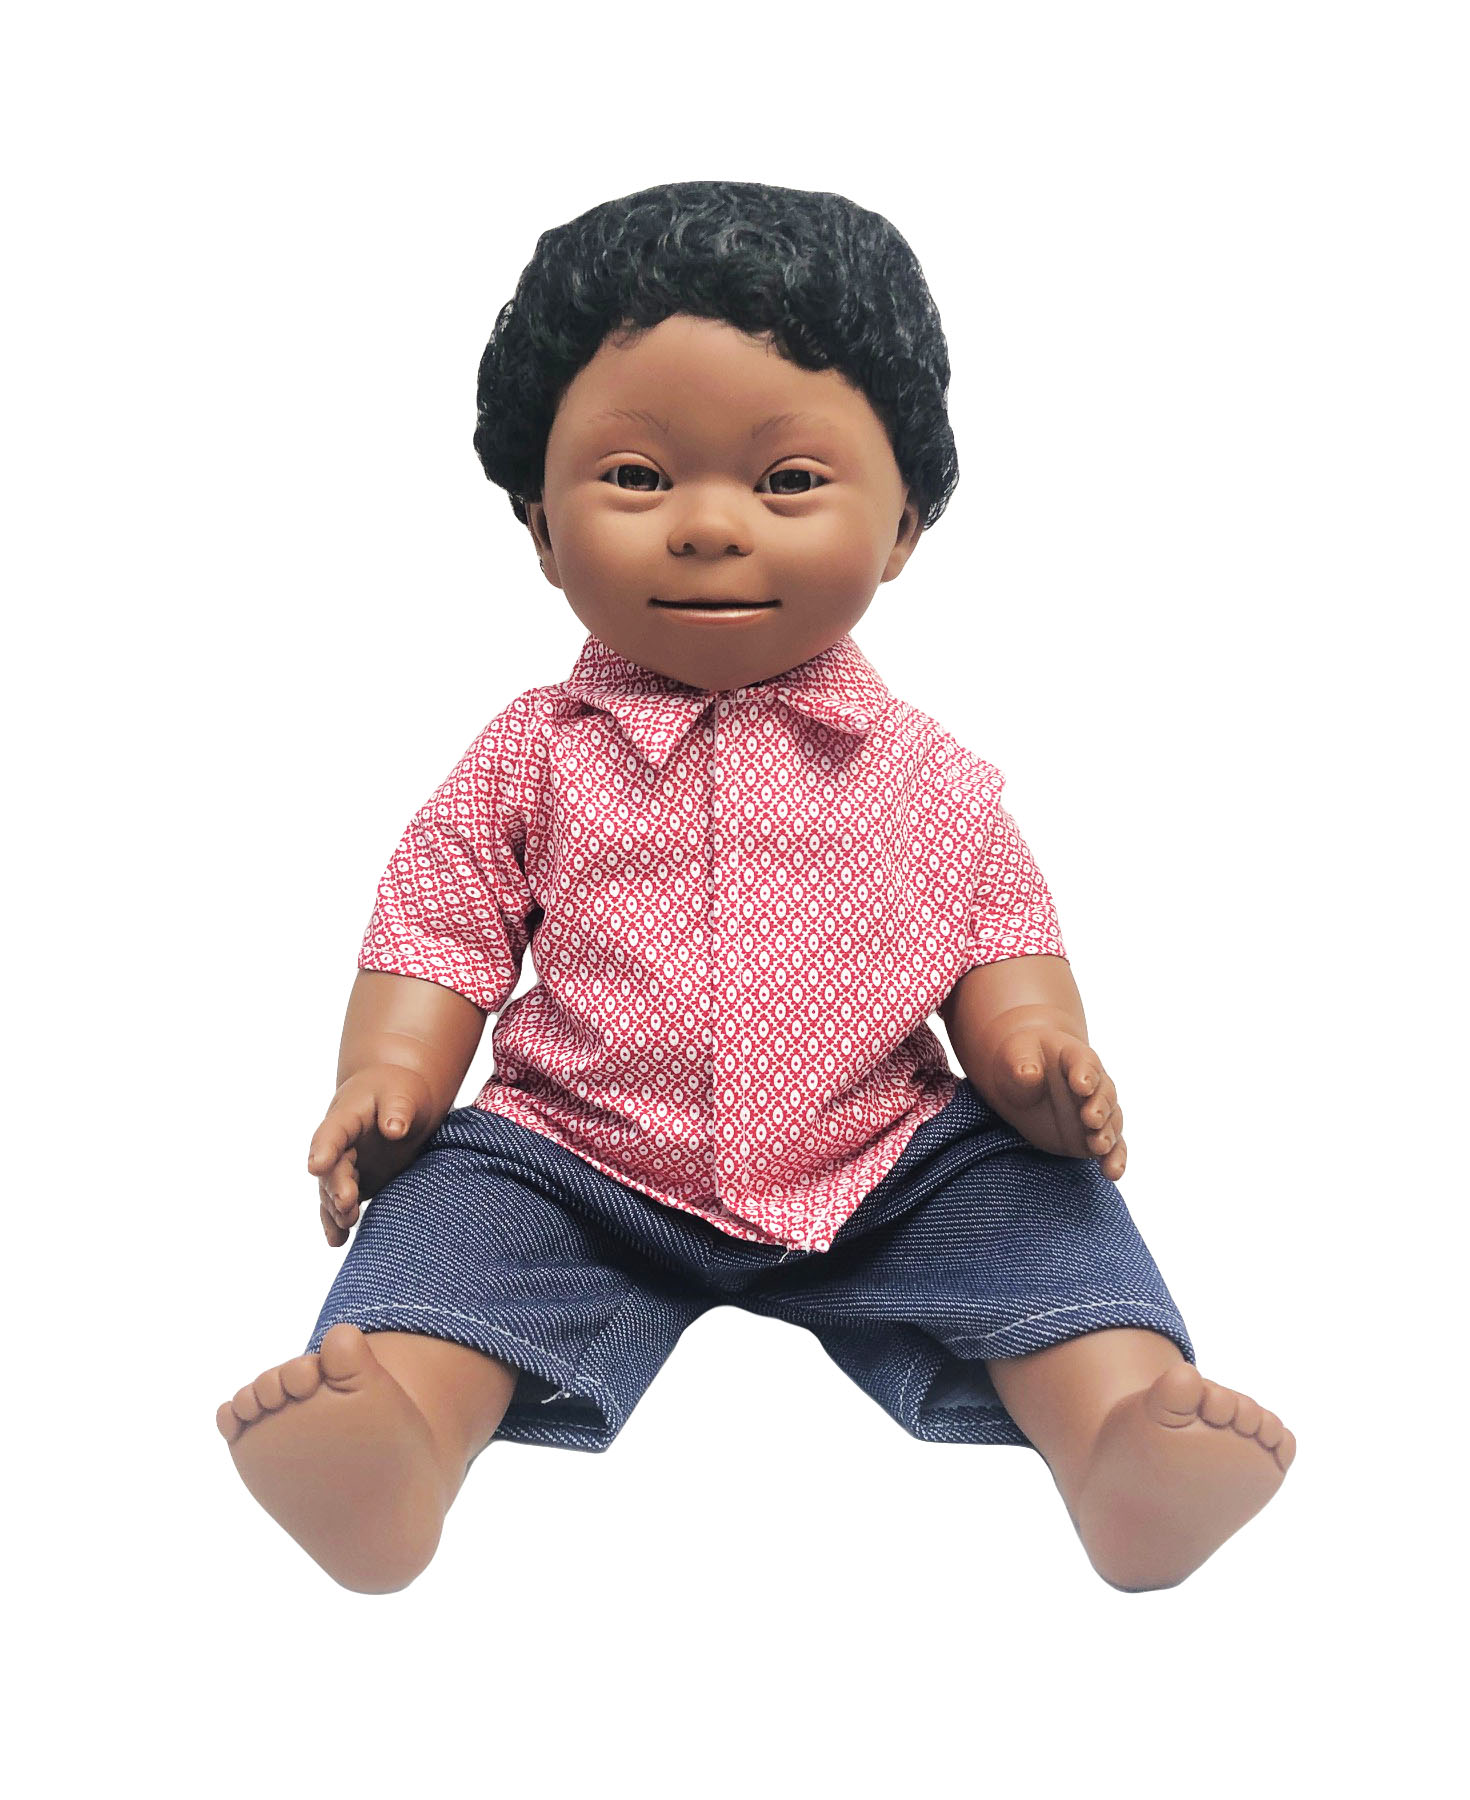 African Boy - Down Syndrome Doll